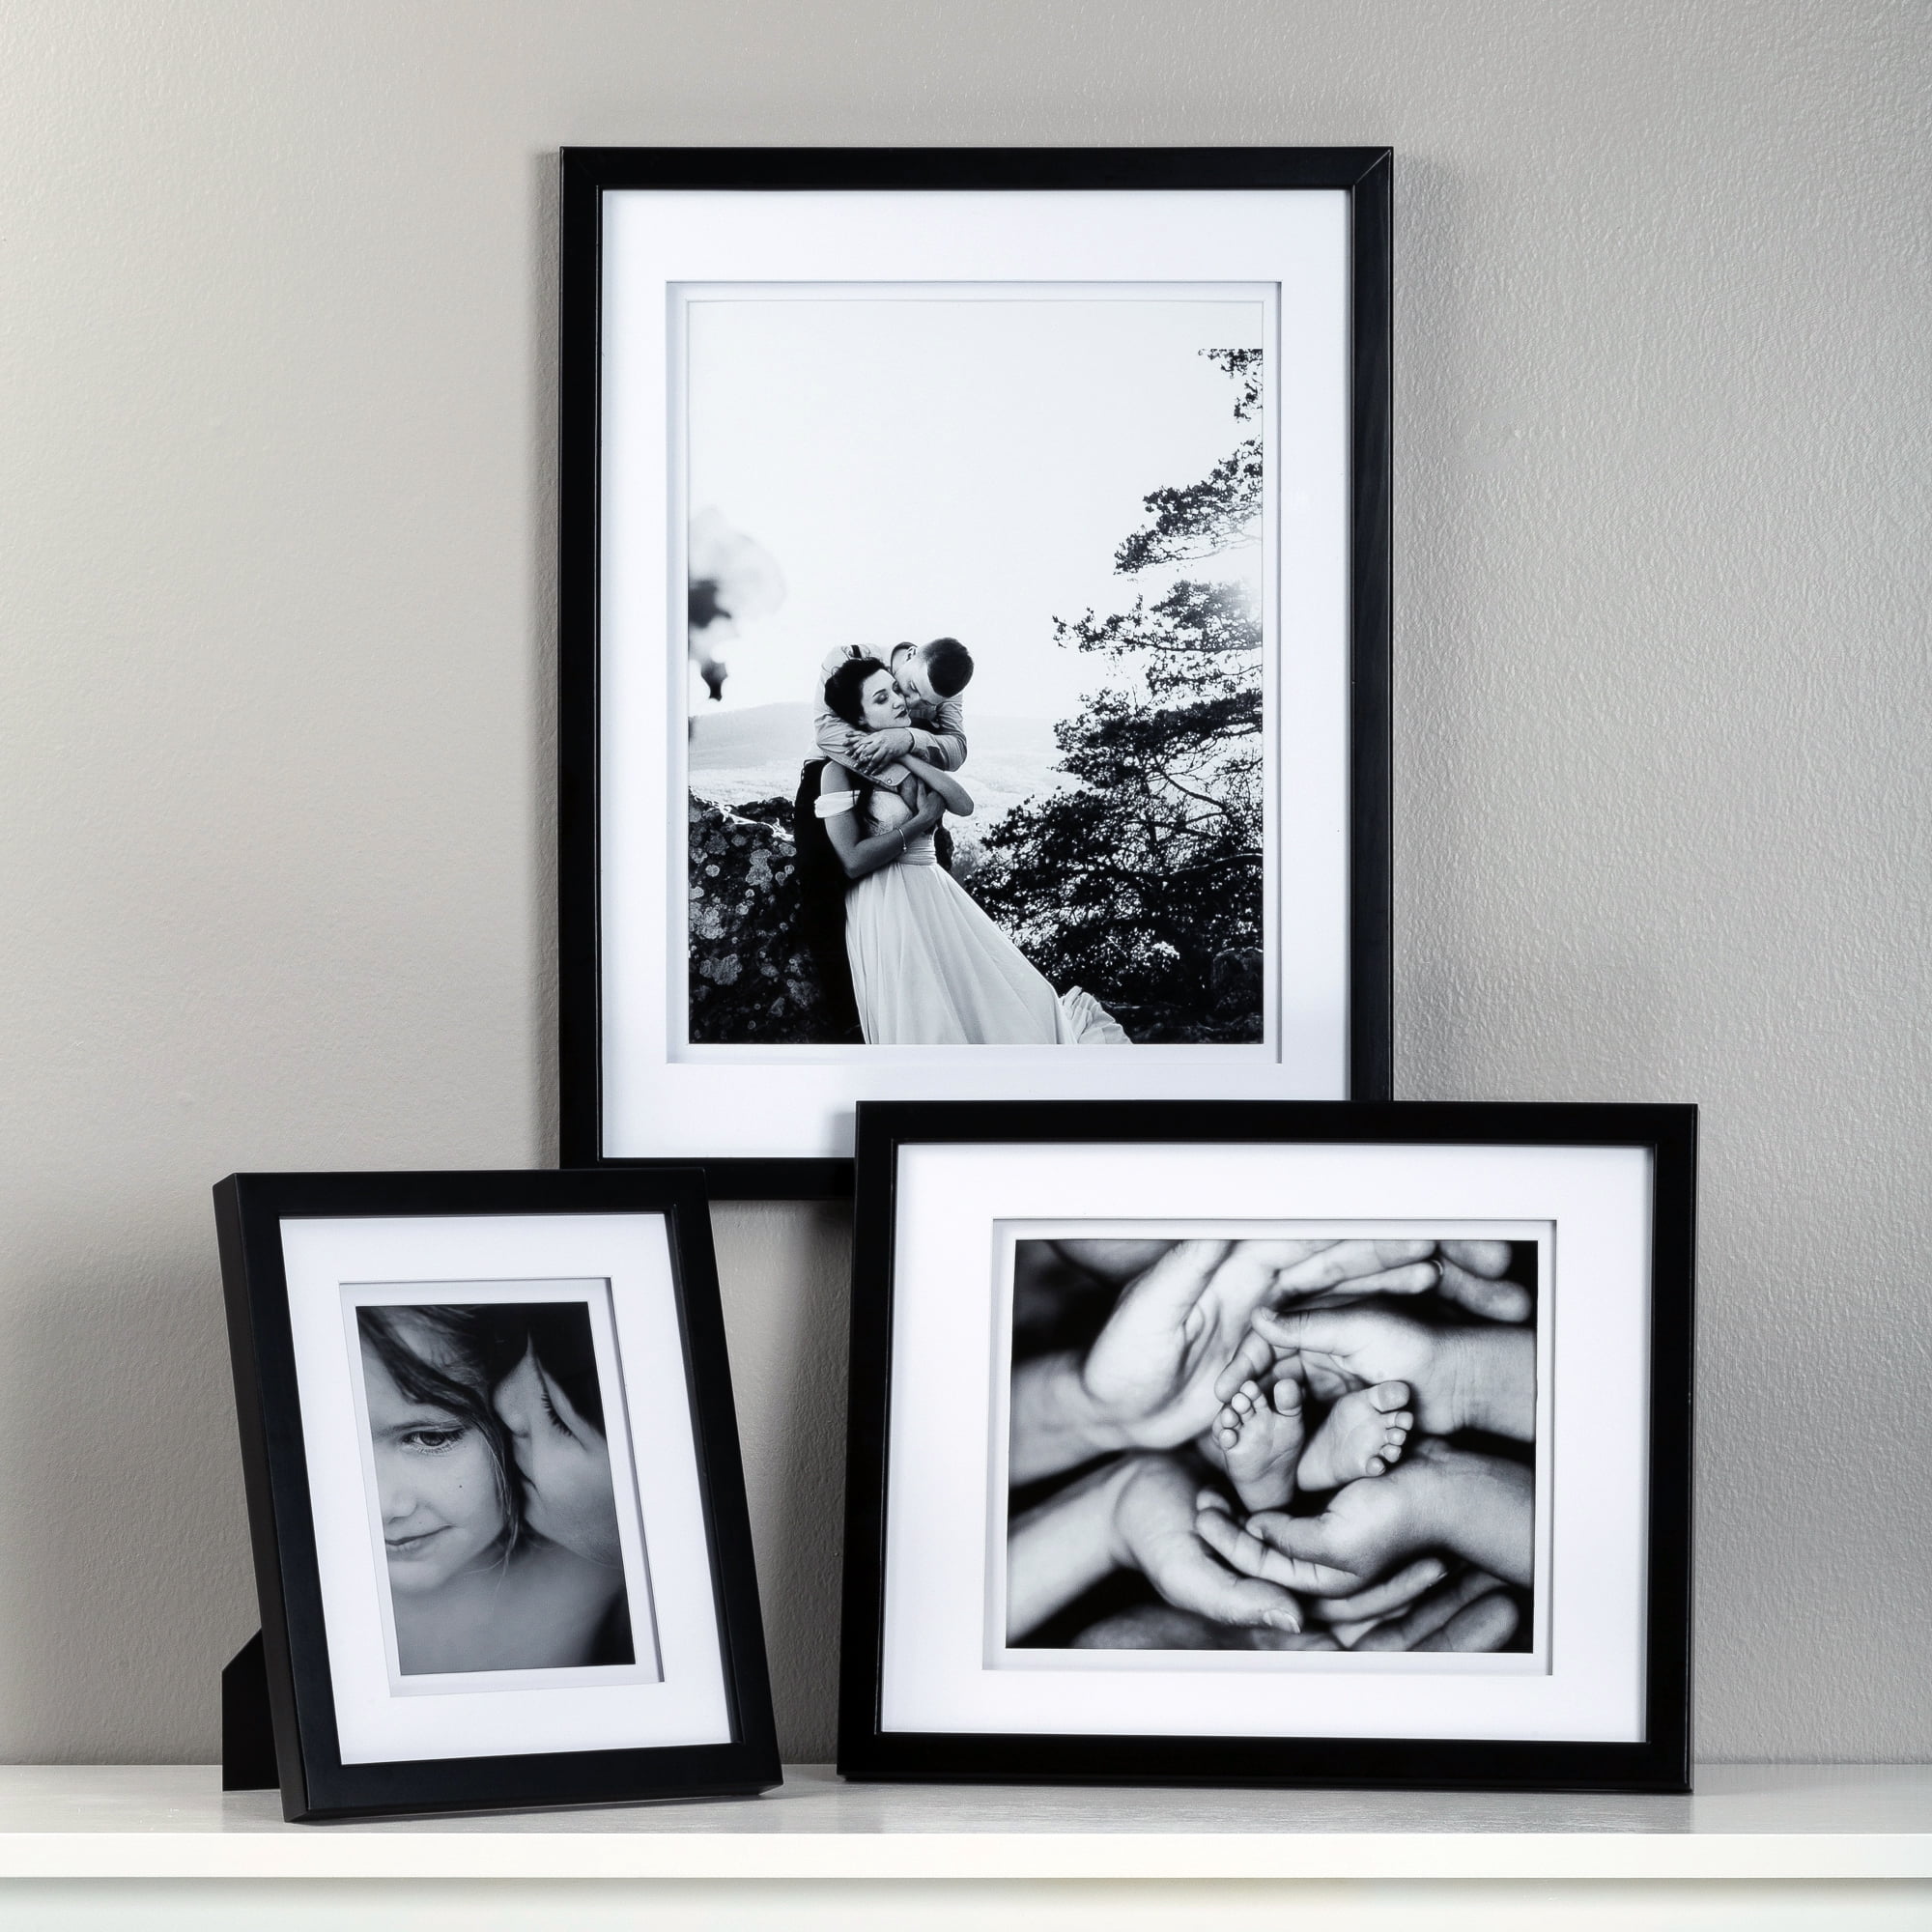 5x7 Mat for 8x10 Frame - Precut Mat Board Acid-Free Charcoal 5x7 Photo  Matte Made to Fit a 8x10 Picture Frame - Bed Bath & Beyond - 38873786